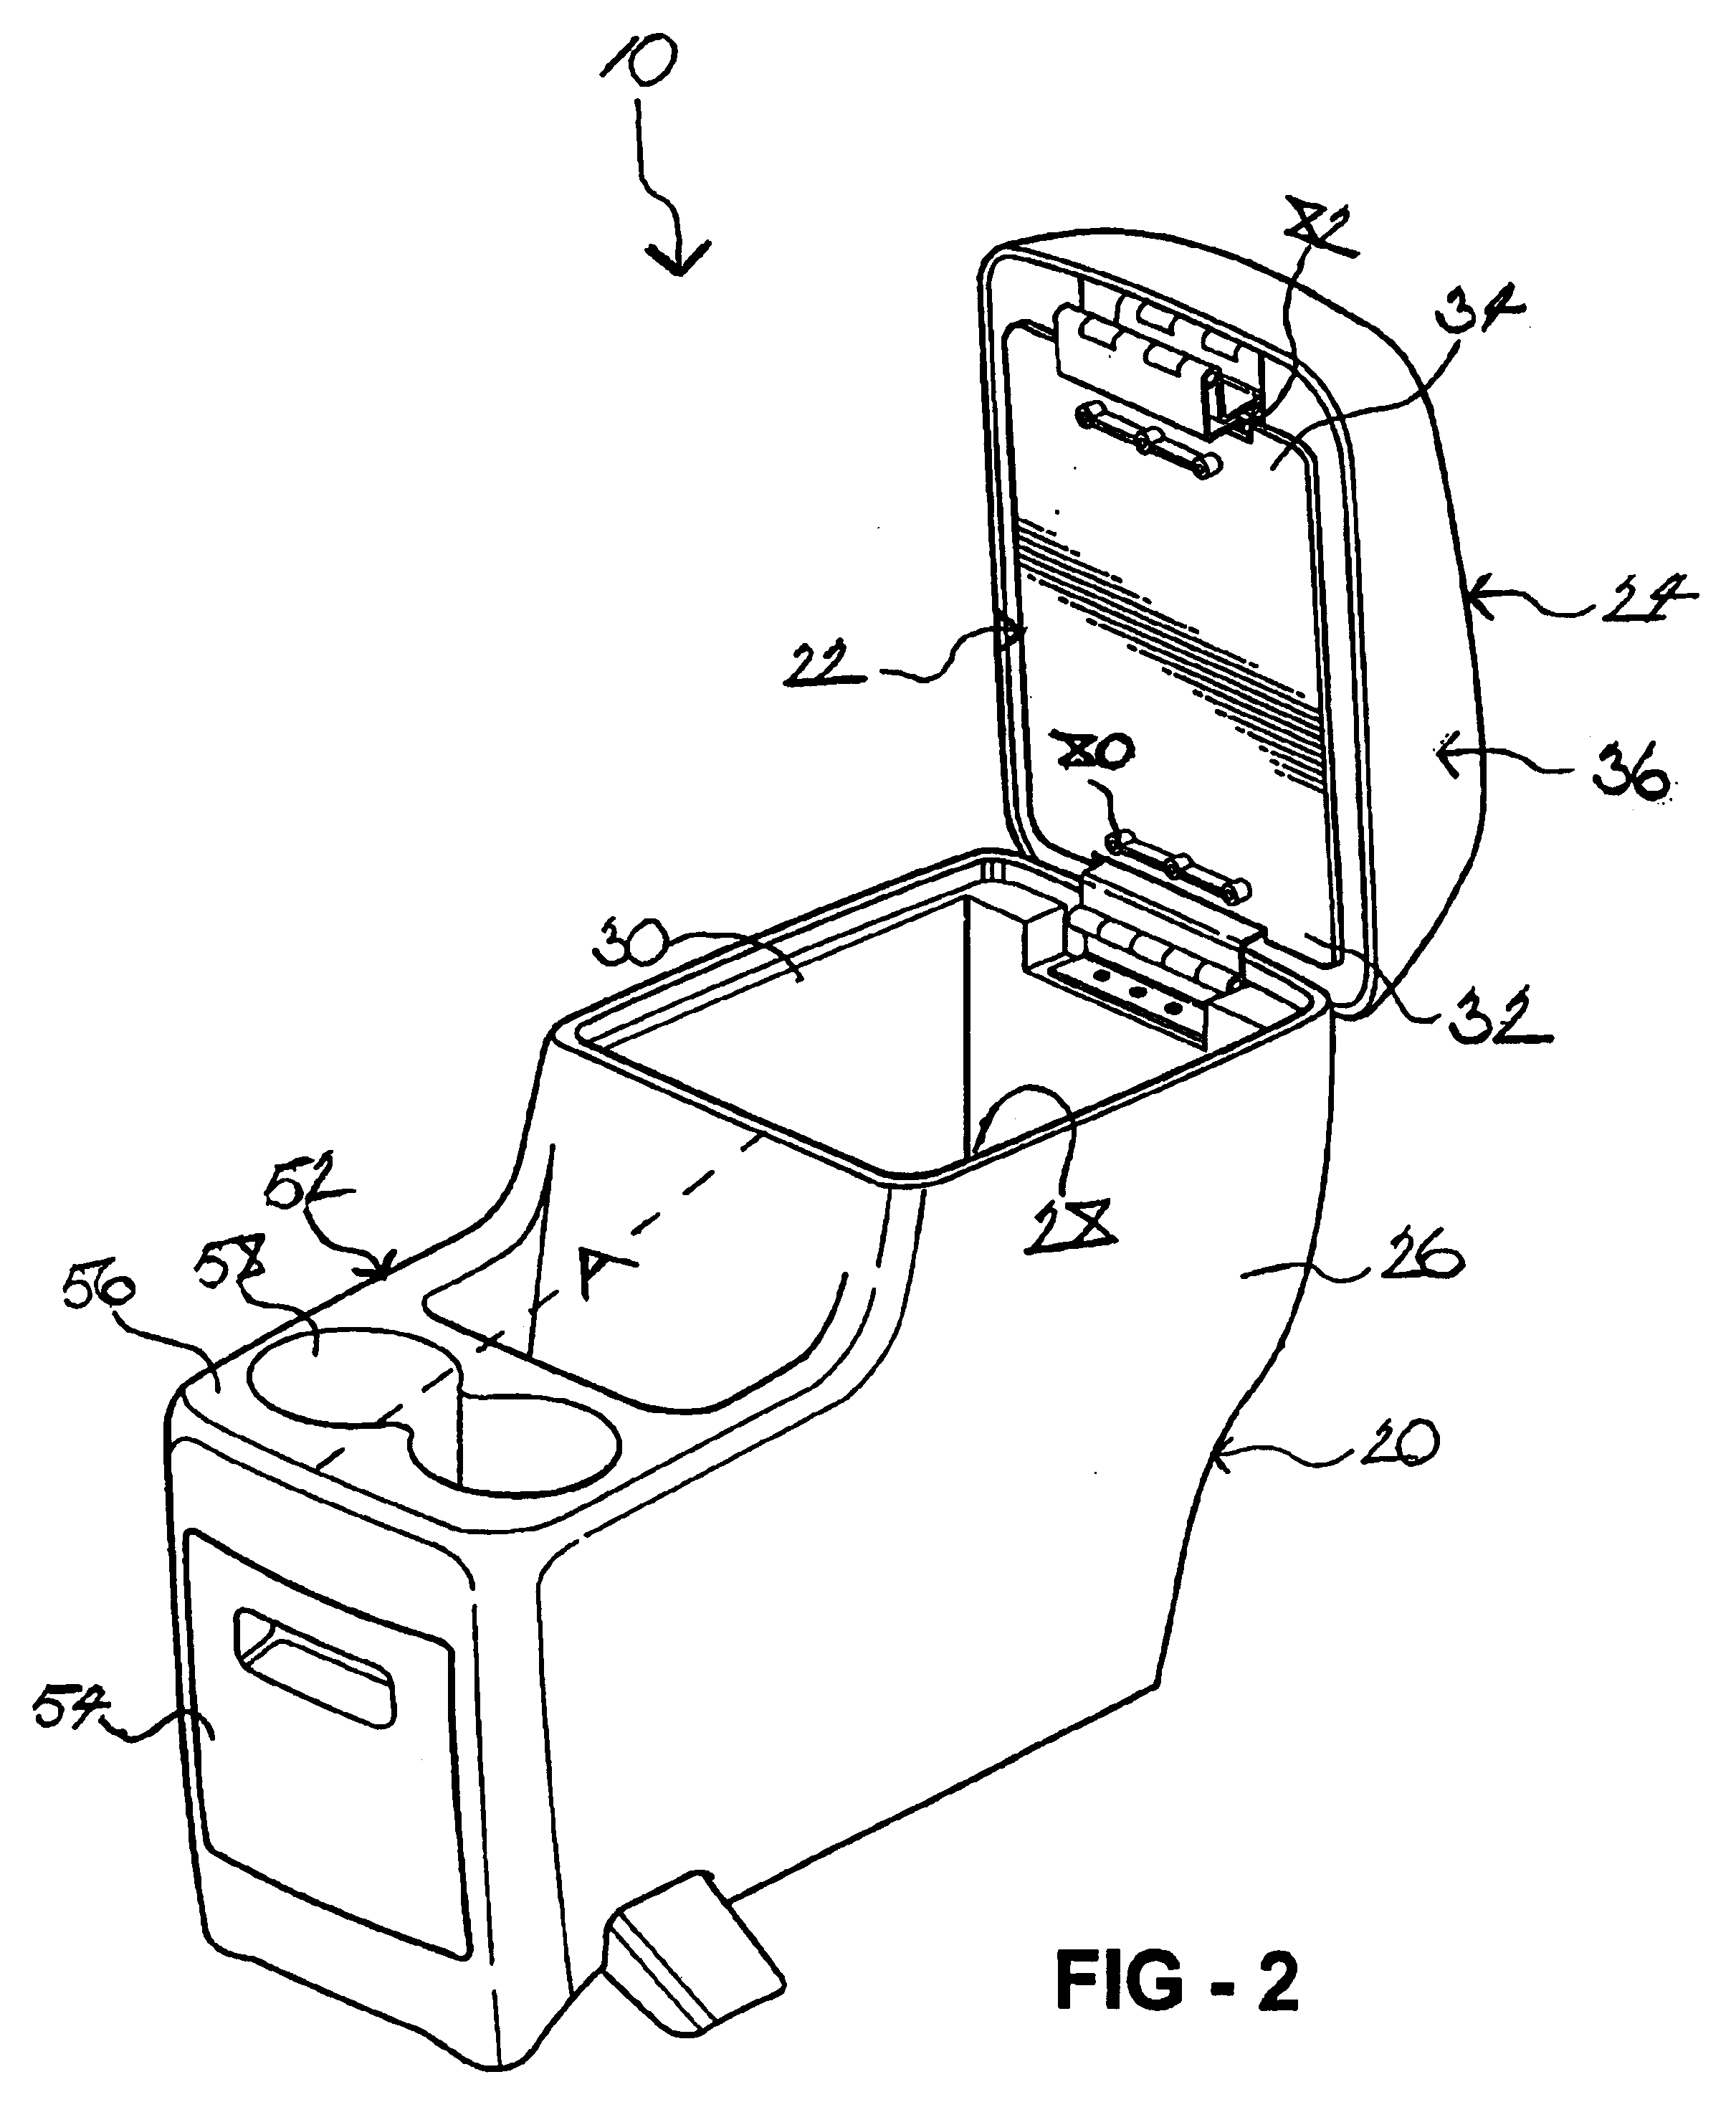 Console system having a double-hinged lid